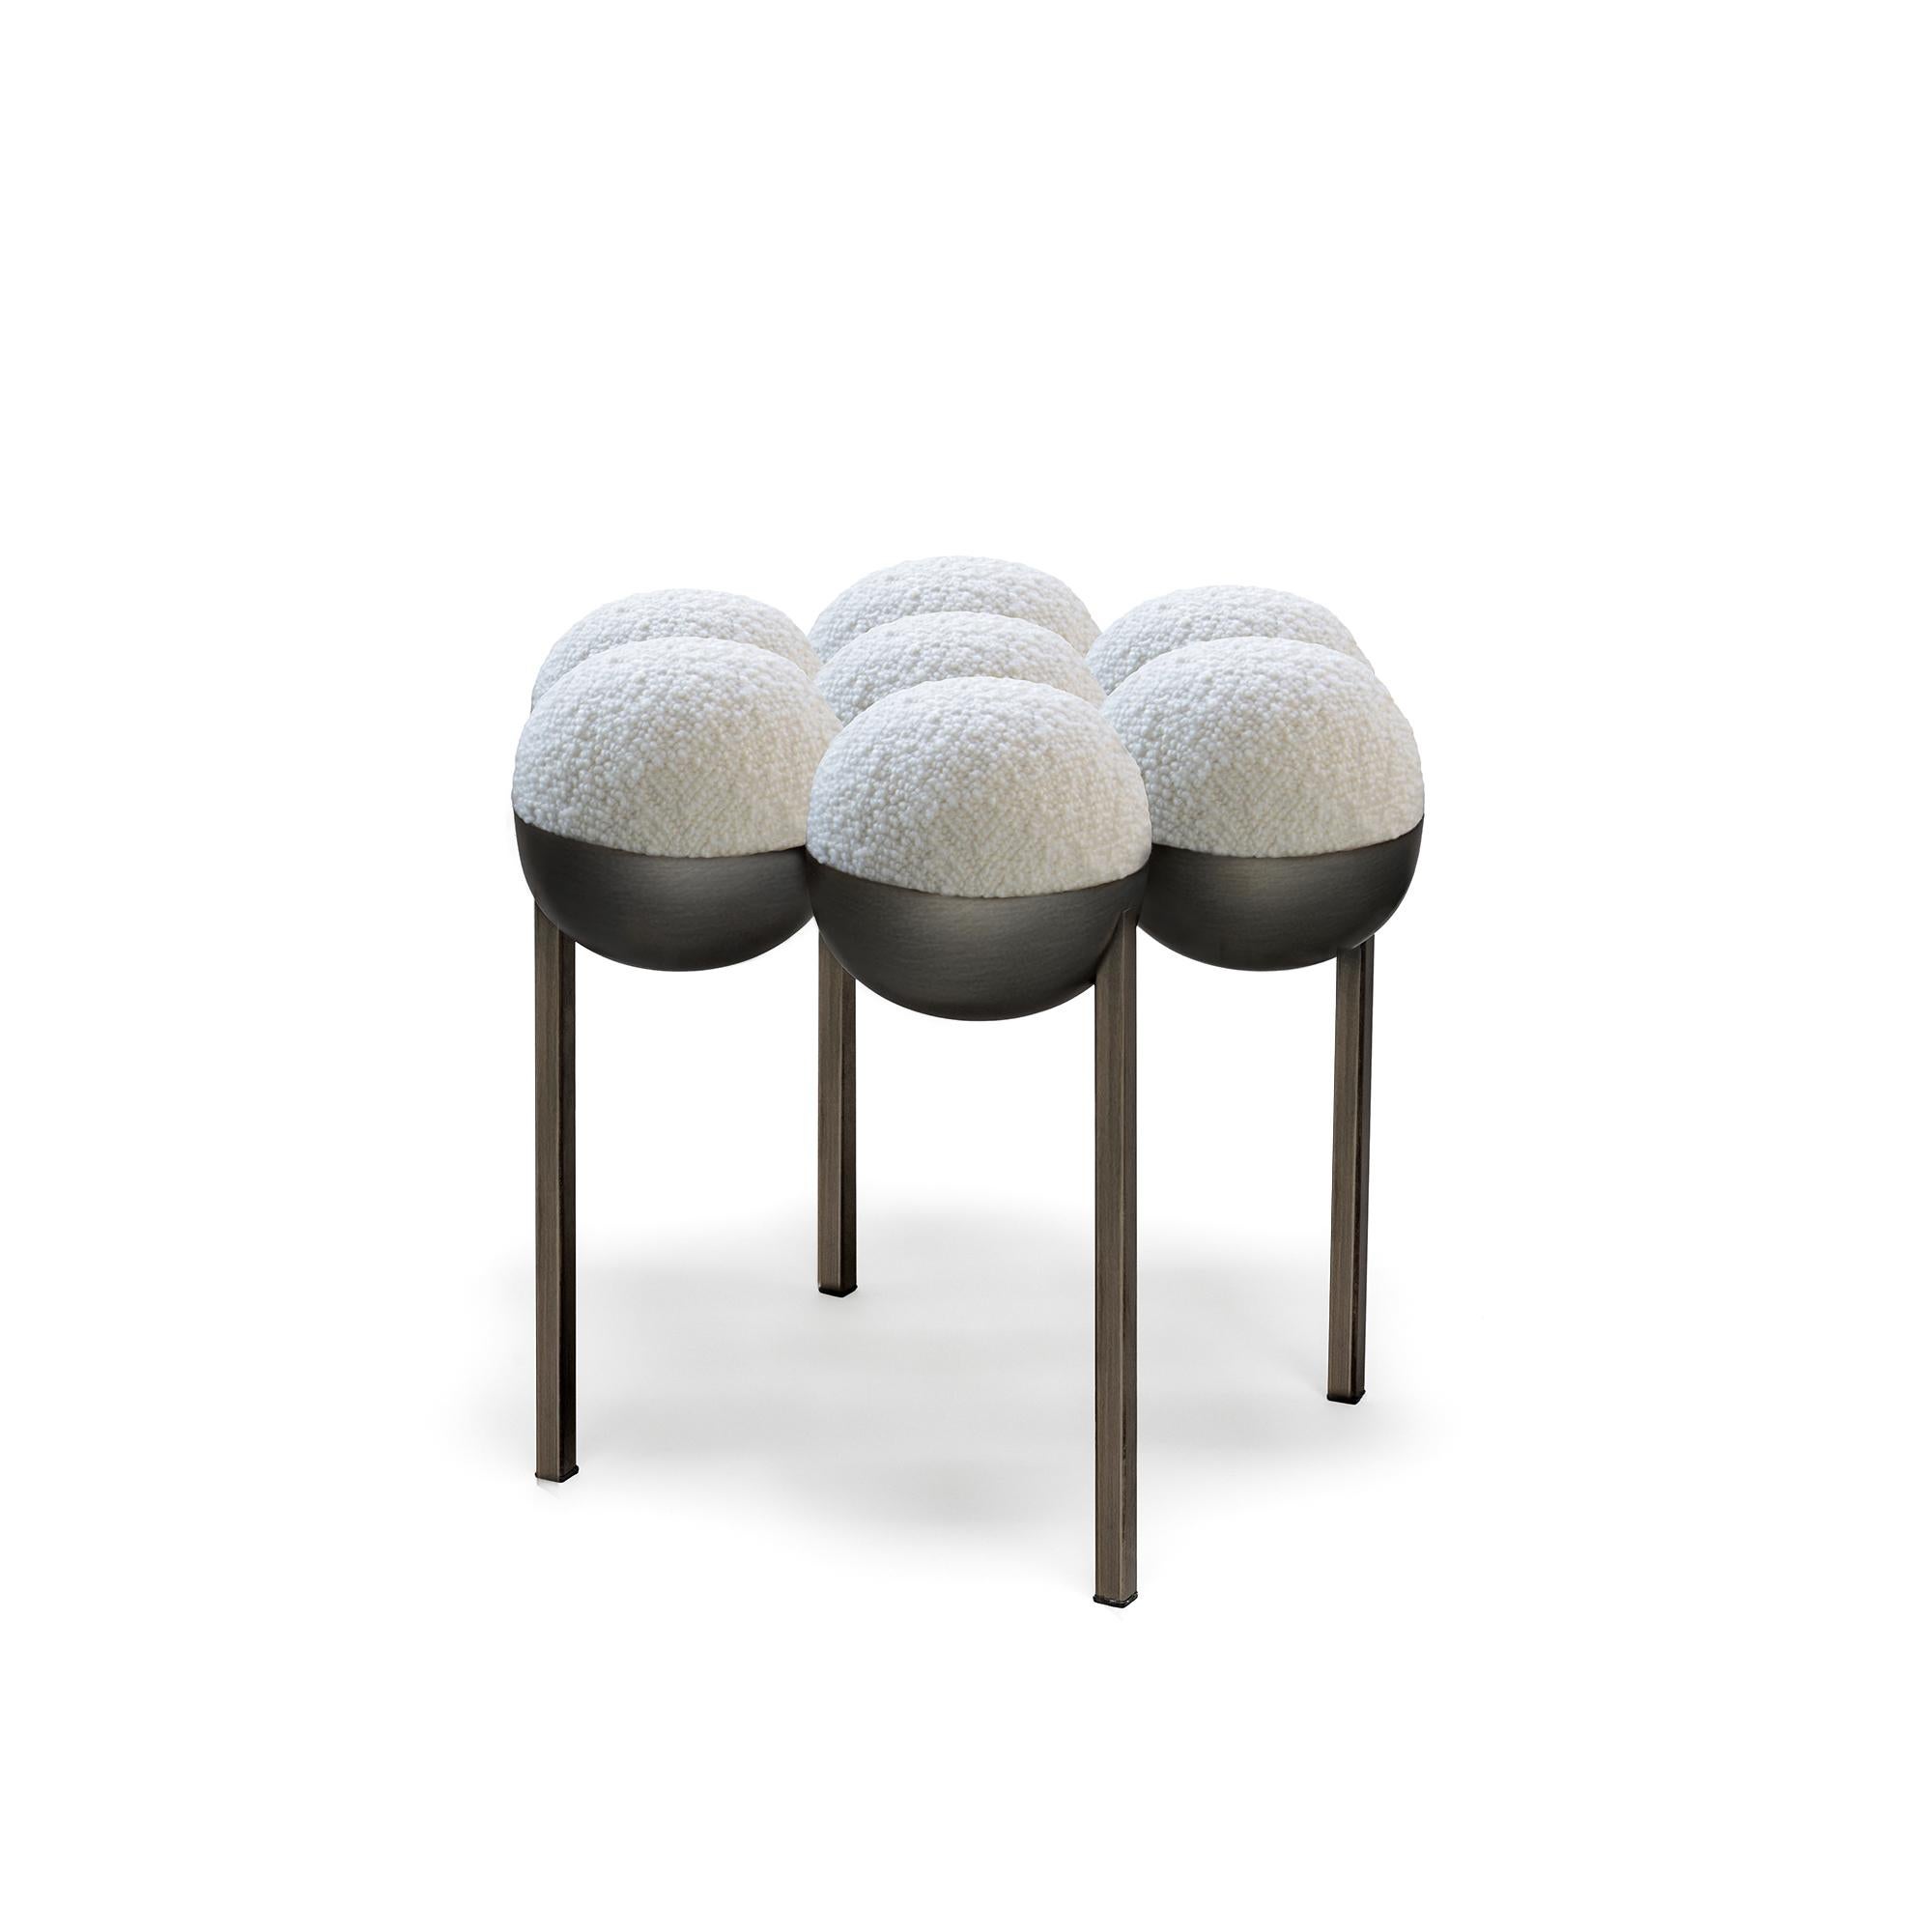 The equally singular Saturn pouffe utilizes the same gathered bilboquet seat construction, to create a more simplified but still incredibly distinctive form. The sumptuously undulating seat instantly appeals with its invitingly upholstered comfort,